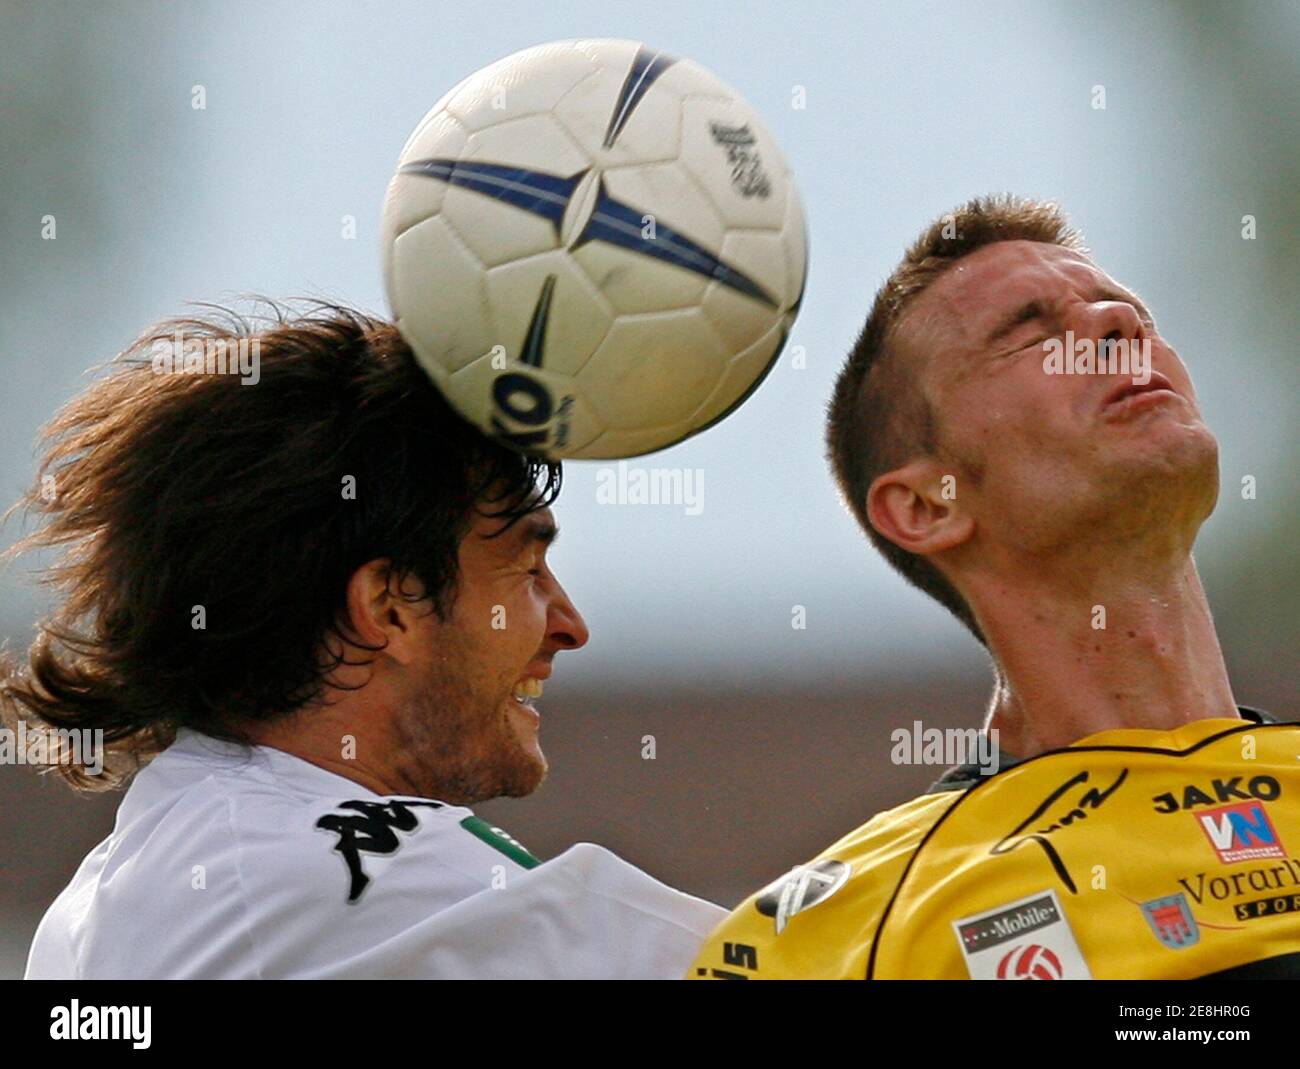 Altach's Oliver Mattle (R) challenges Tirol's Guillermo Imhoff for the ball during their Austrian league soccer match in Altach July 29, 2007. REUTERS/Miro Kuzmanovic (AUSTRIA) Stock Photo